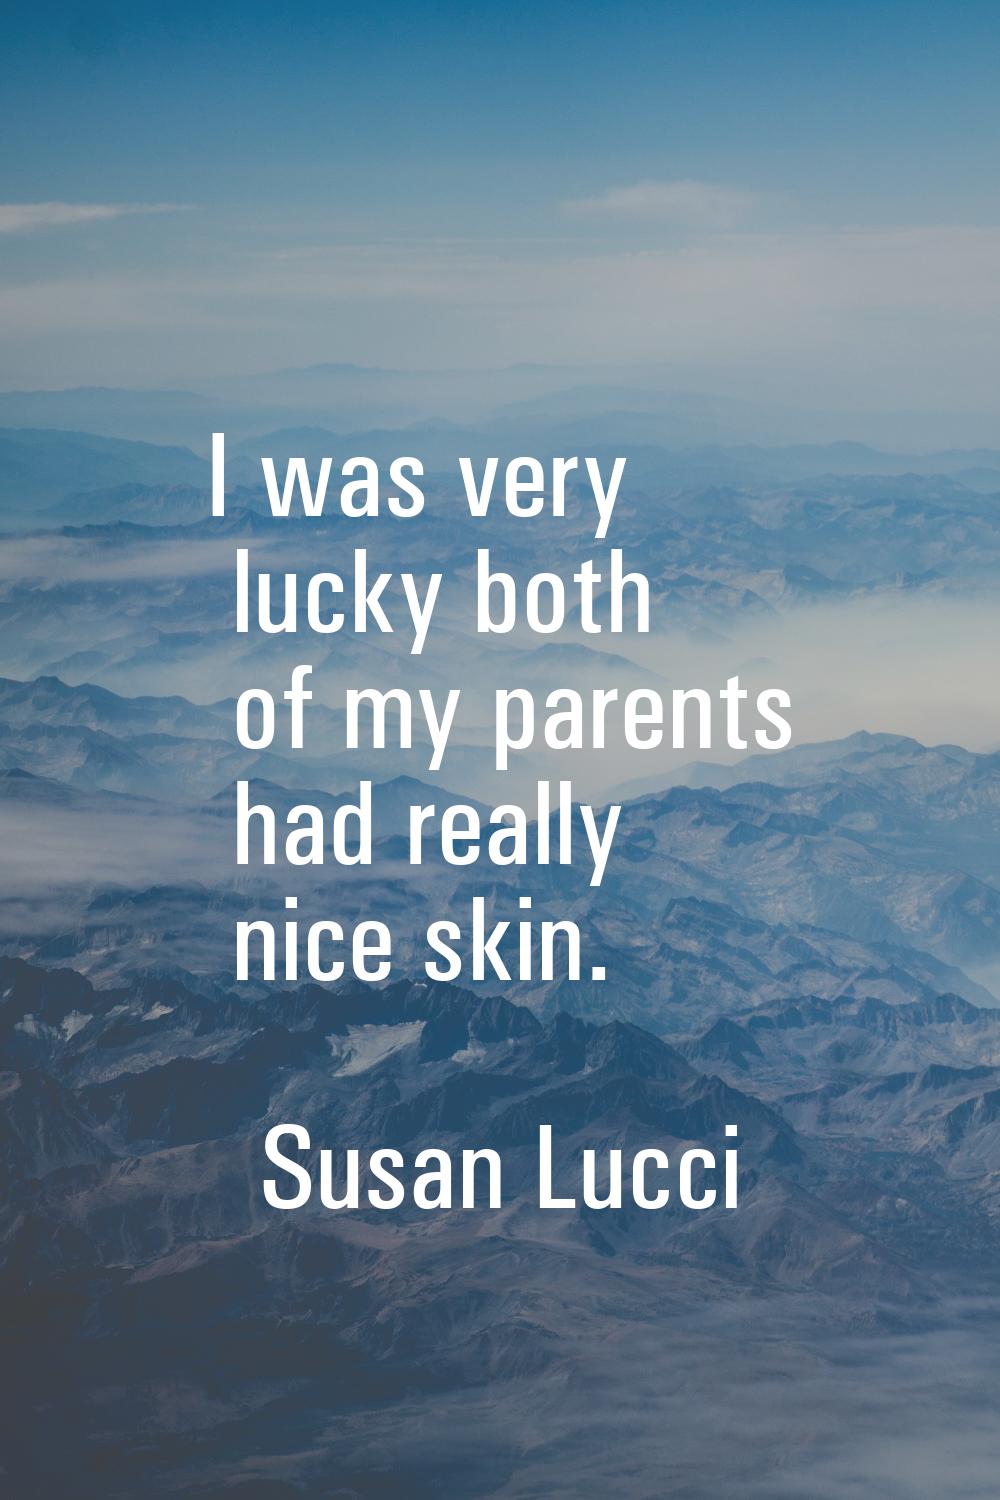 I was very lucky both of my parents had really nice skin.